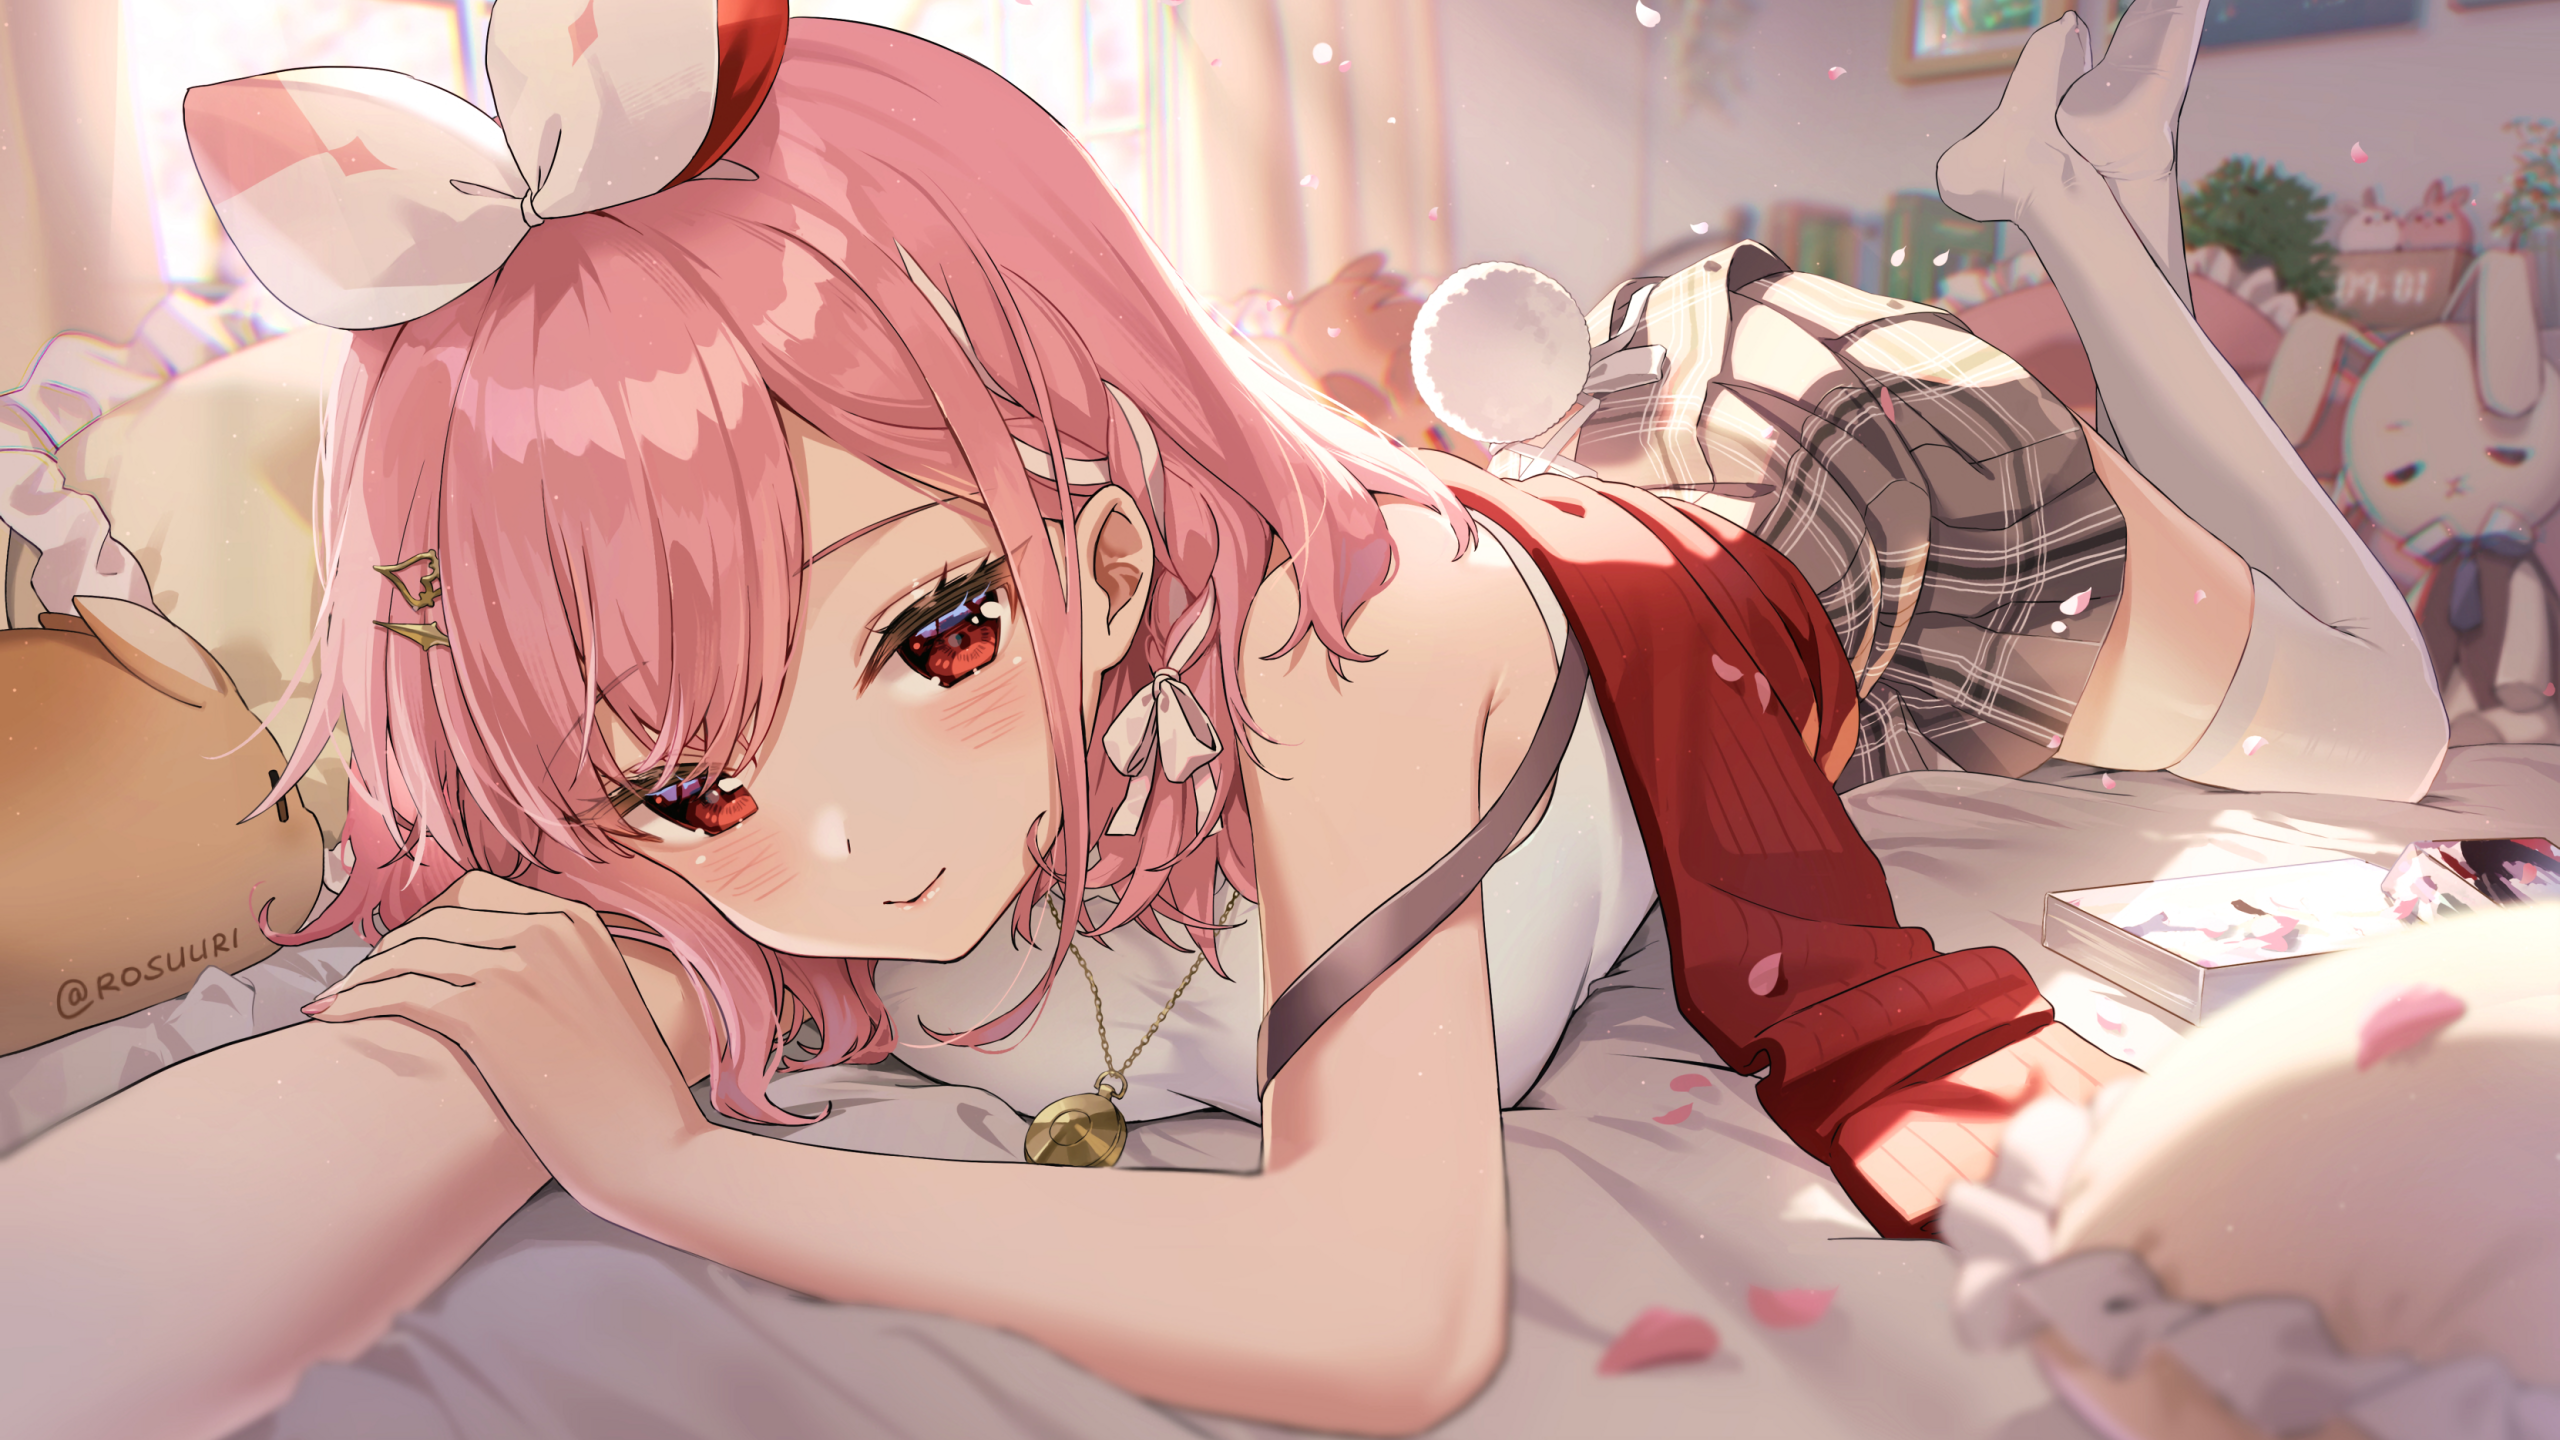 Anime Anime Girls Artwork Chill Out Pink Hair Skirt Stuffed Animal Rosuuri Looking At Viewer Lying D 2560x1440